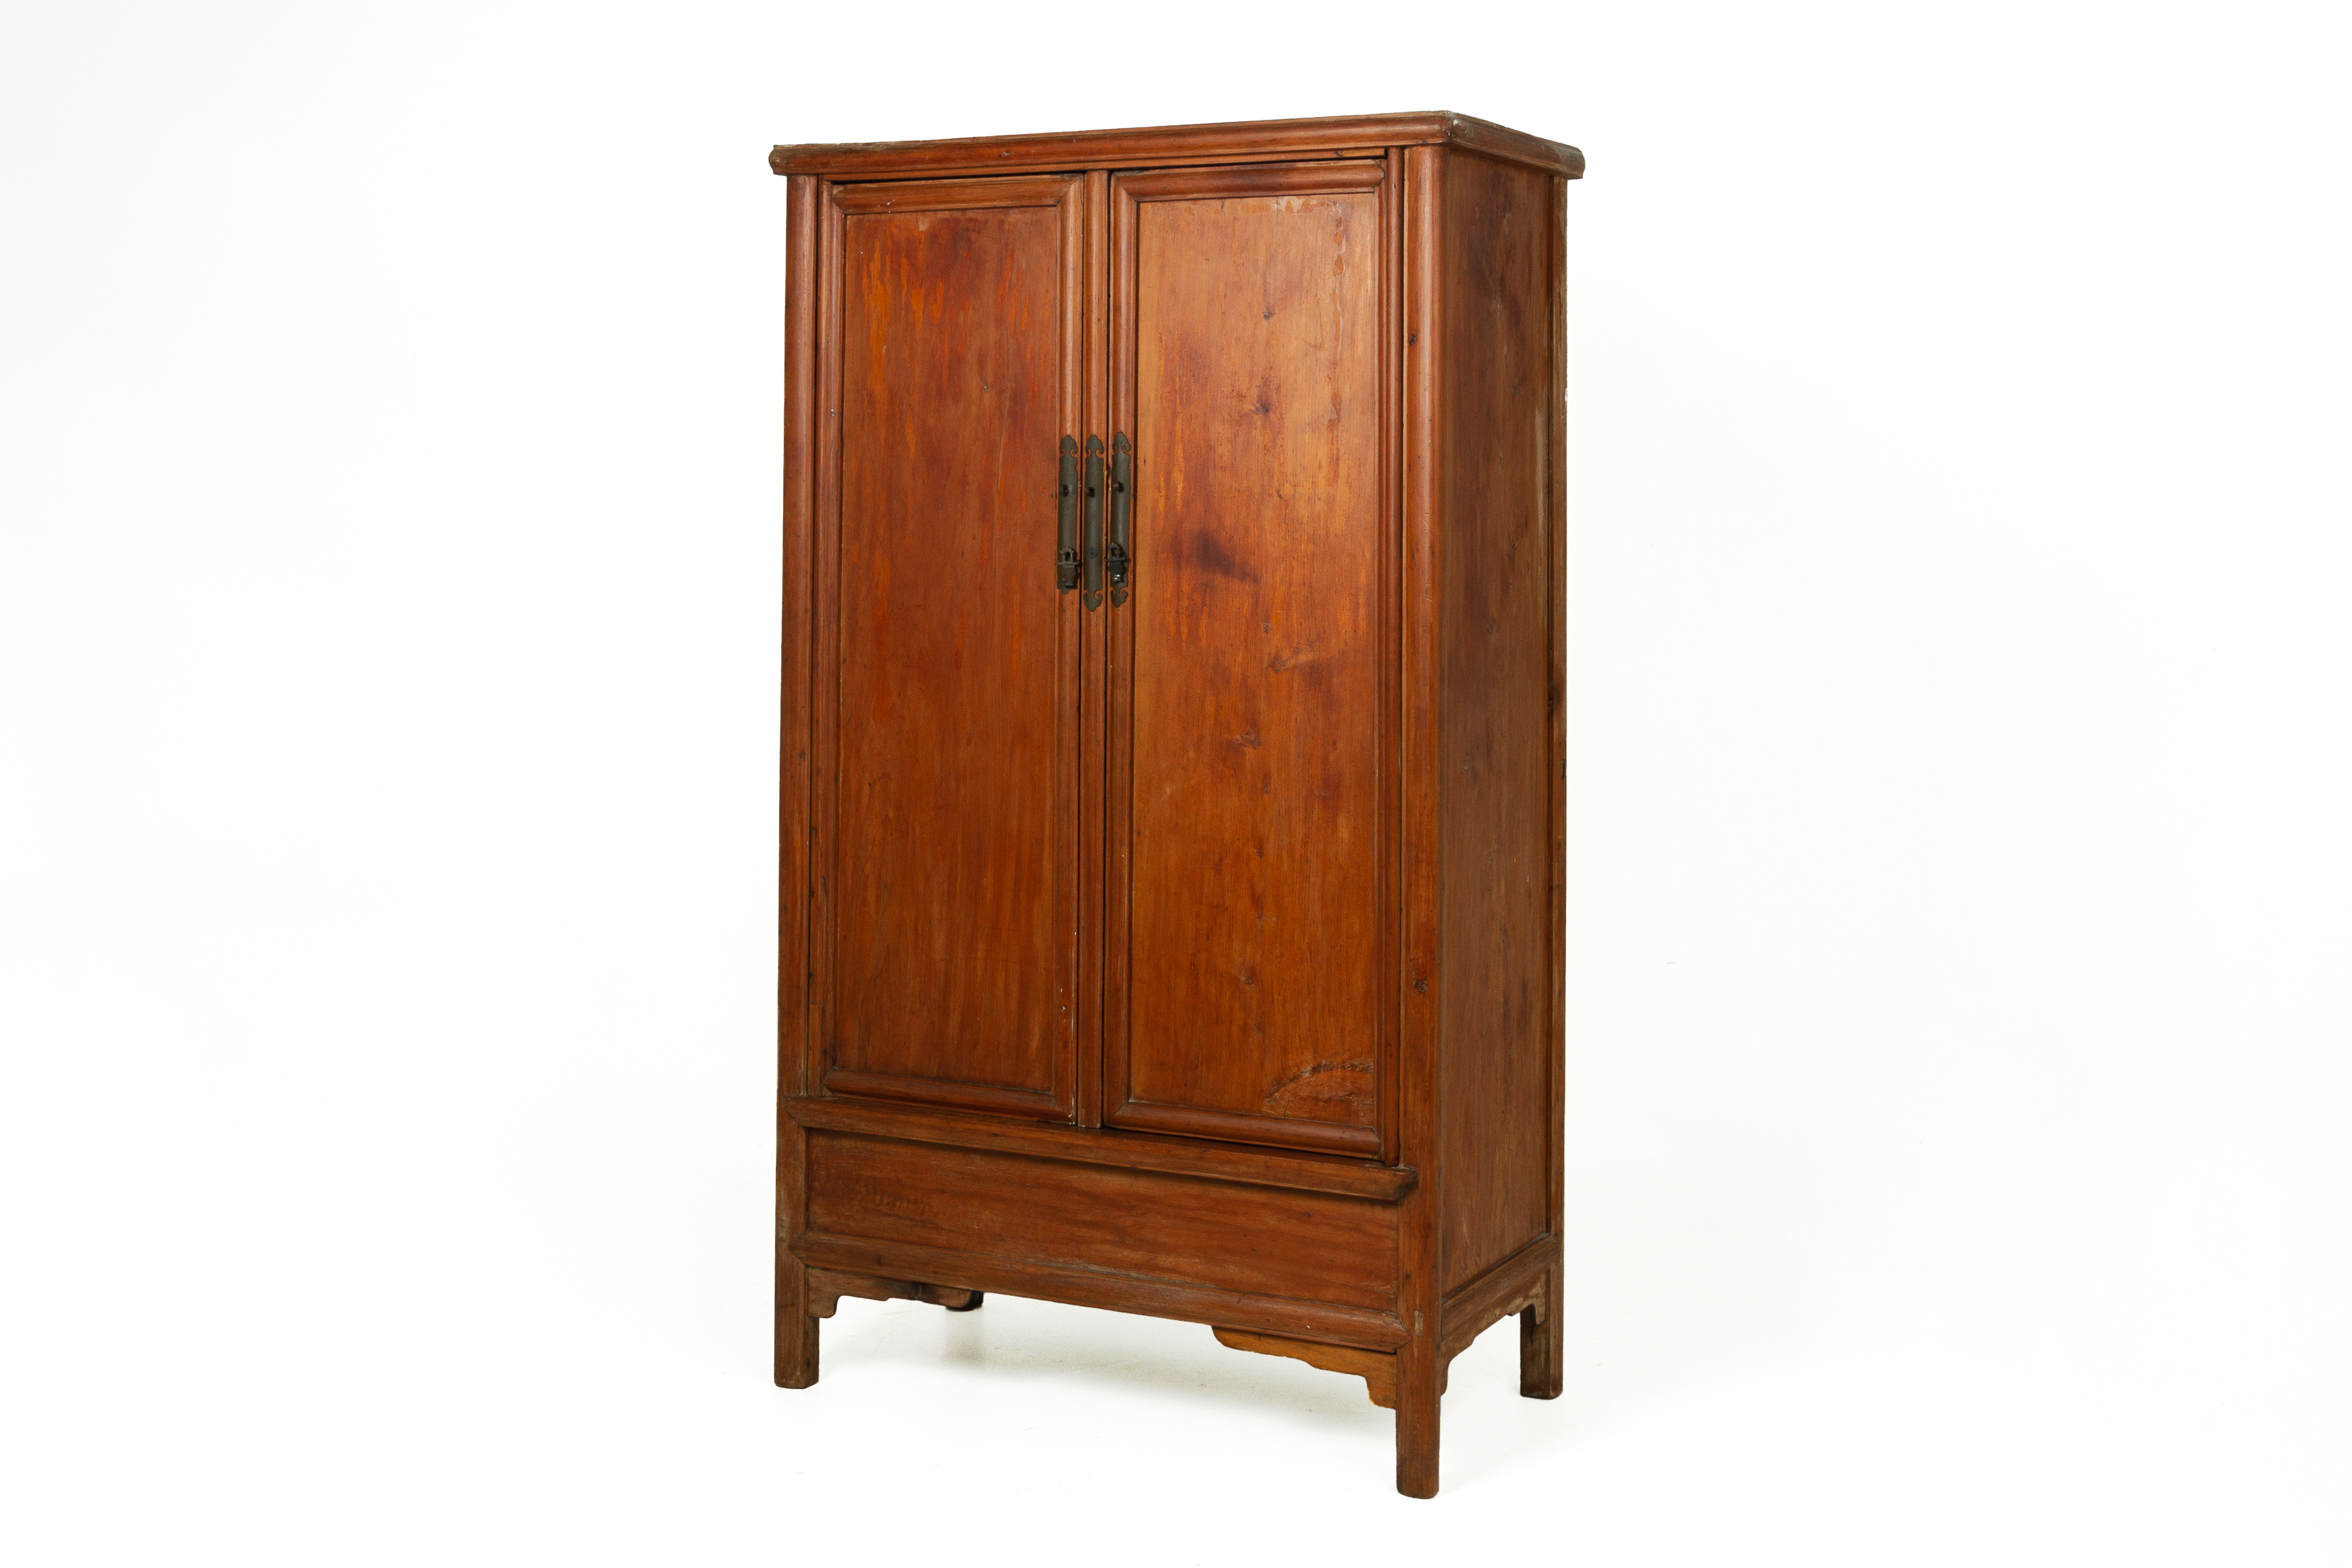 A LARGE CHINESE WOODEN CABINET - Image 2 of 3